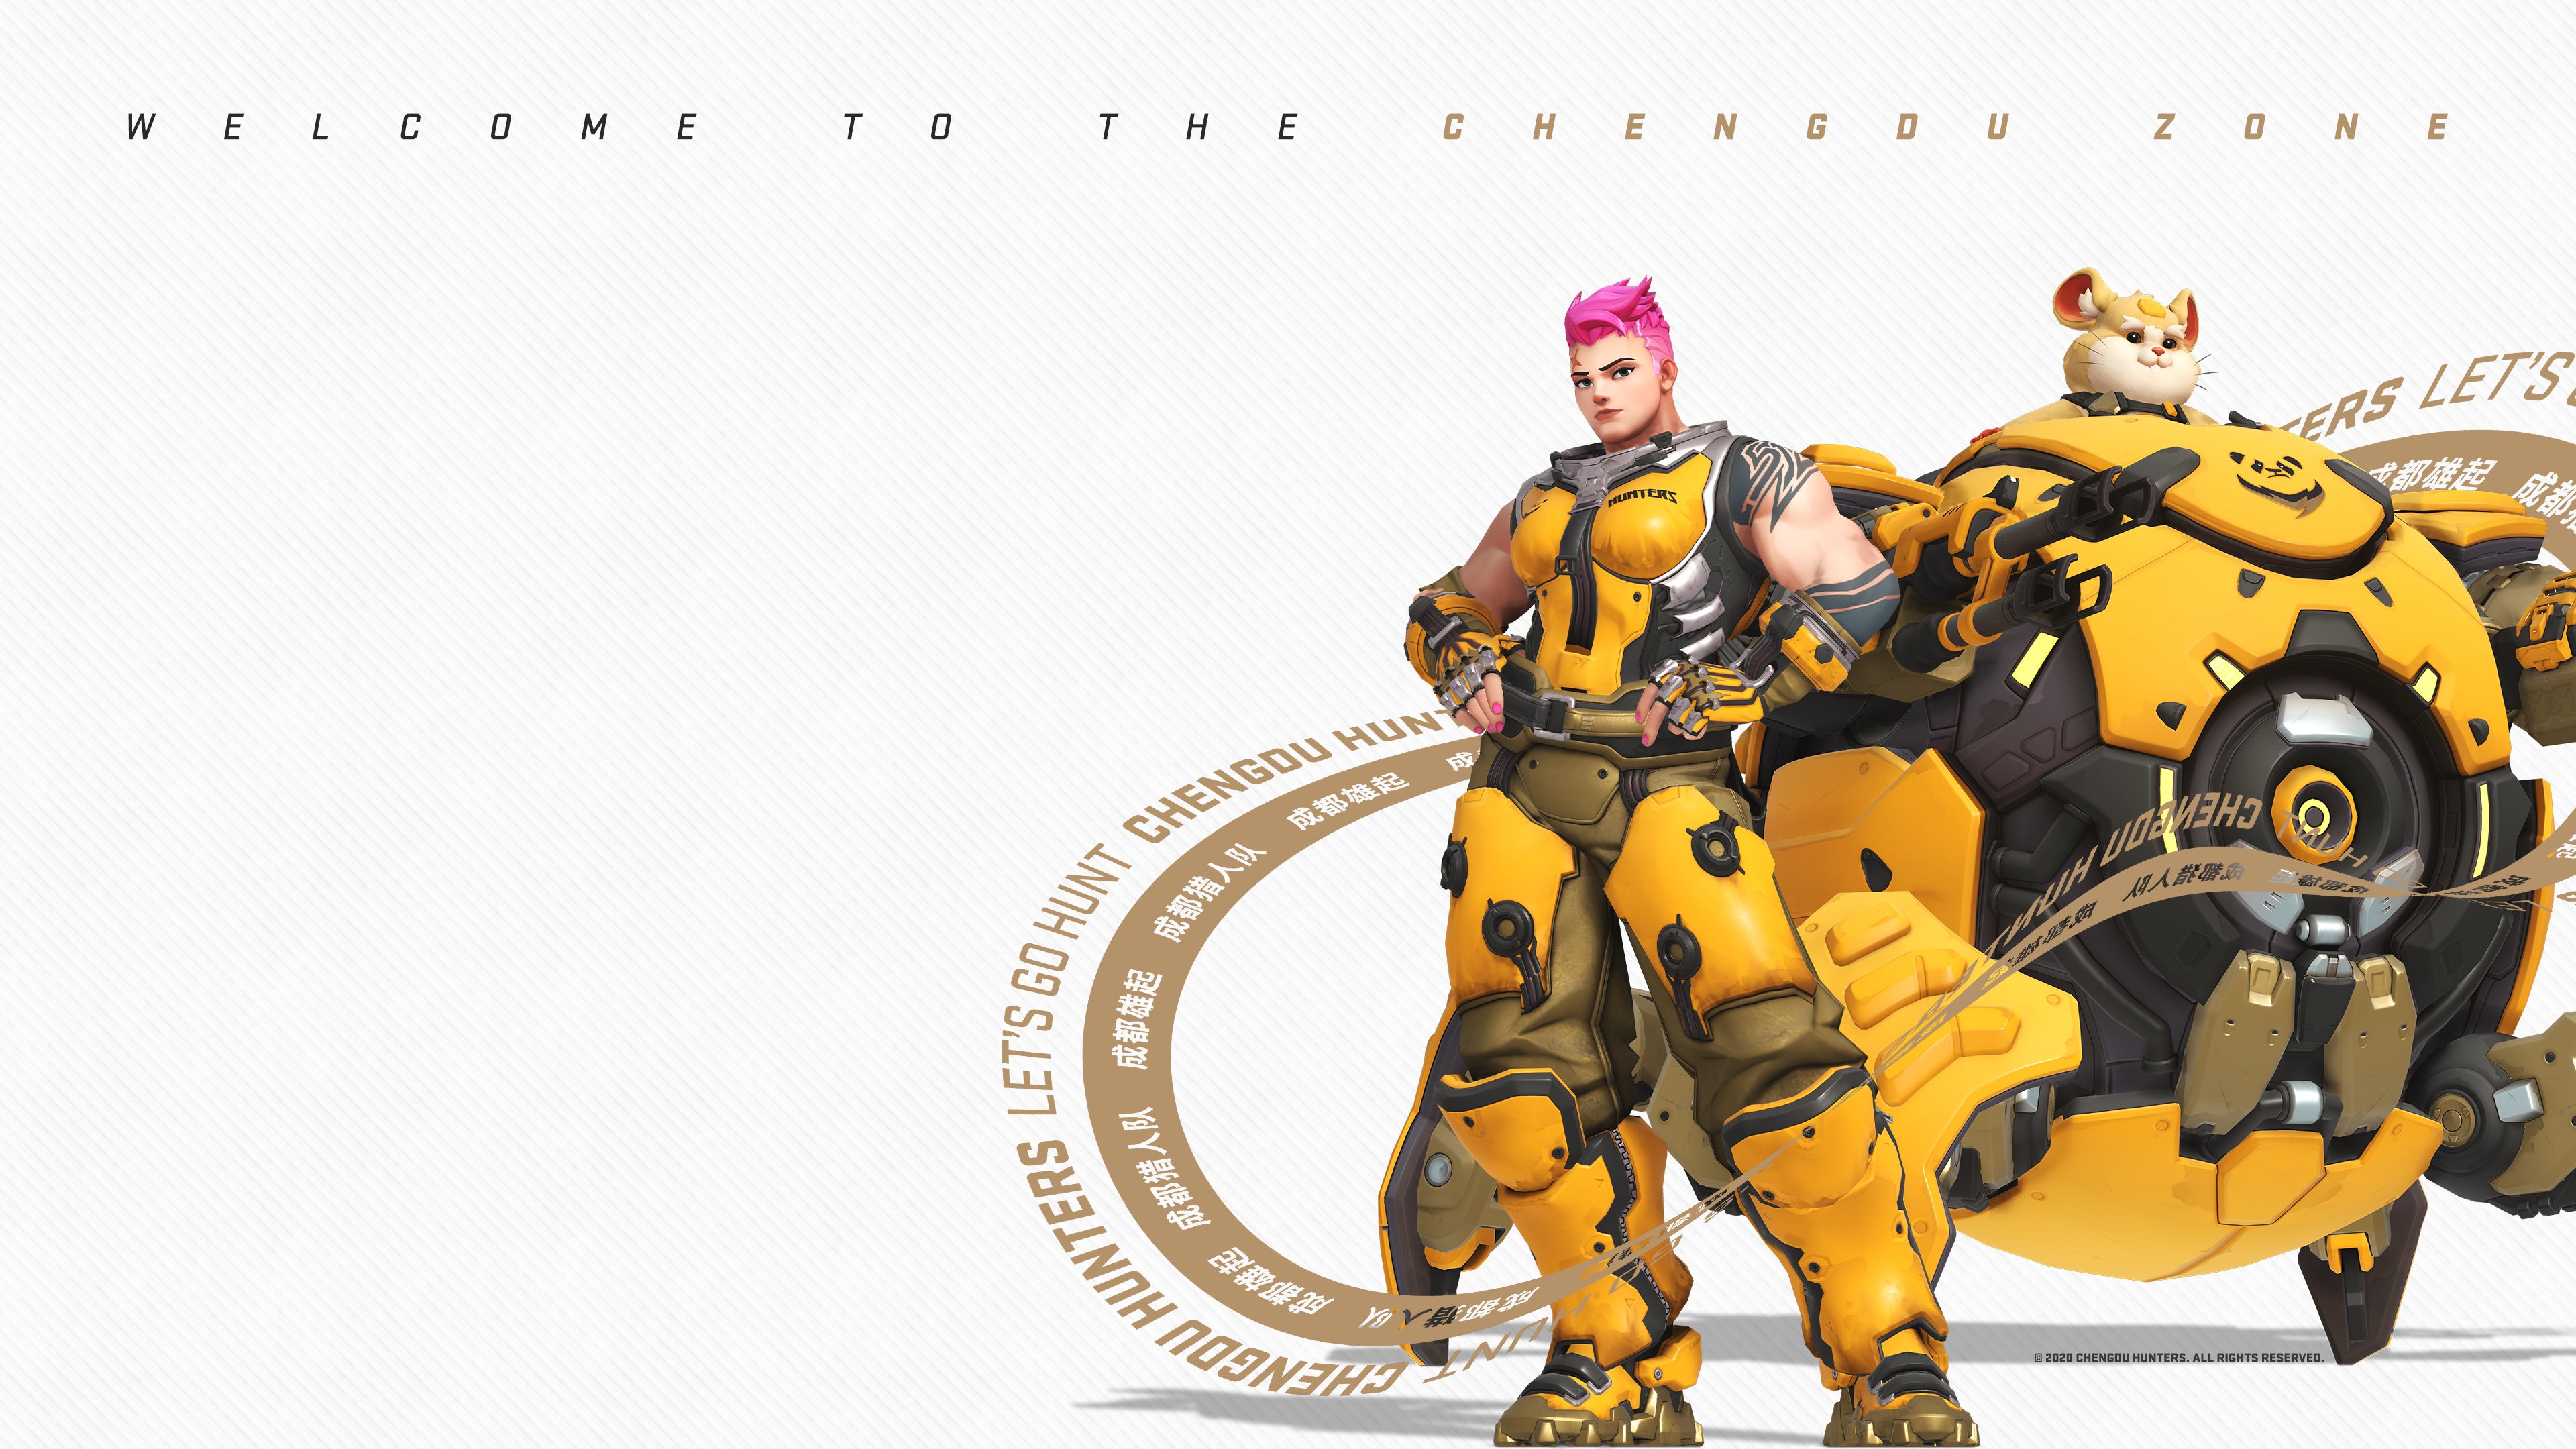 General 3840x2160 Overwatch Overwatch League PC gaming video game art simple background digital art